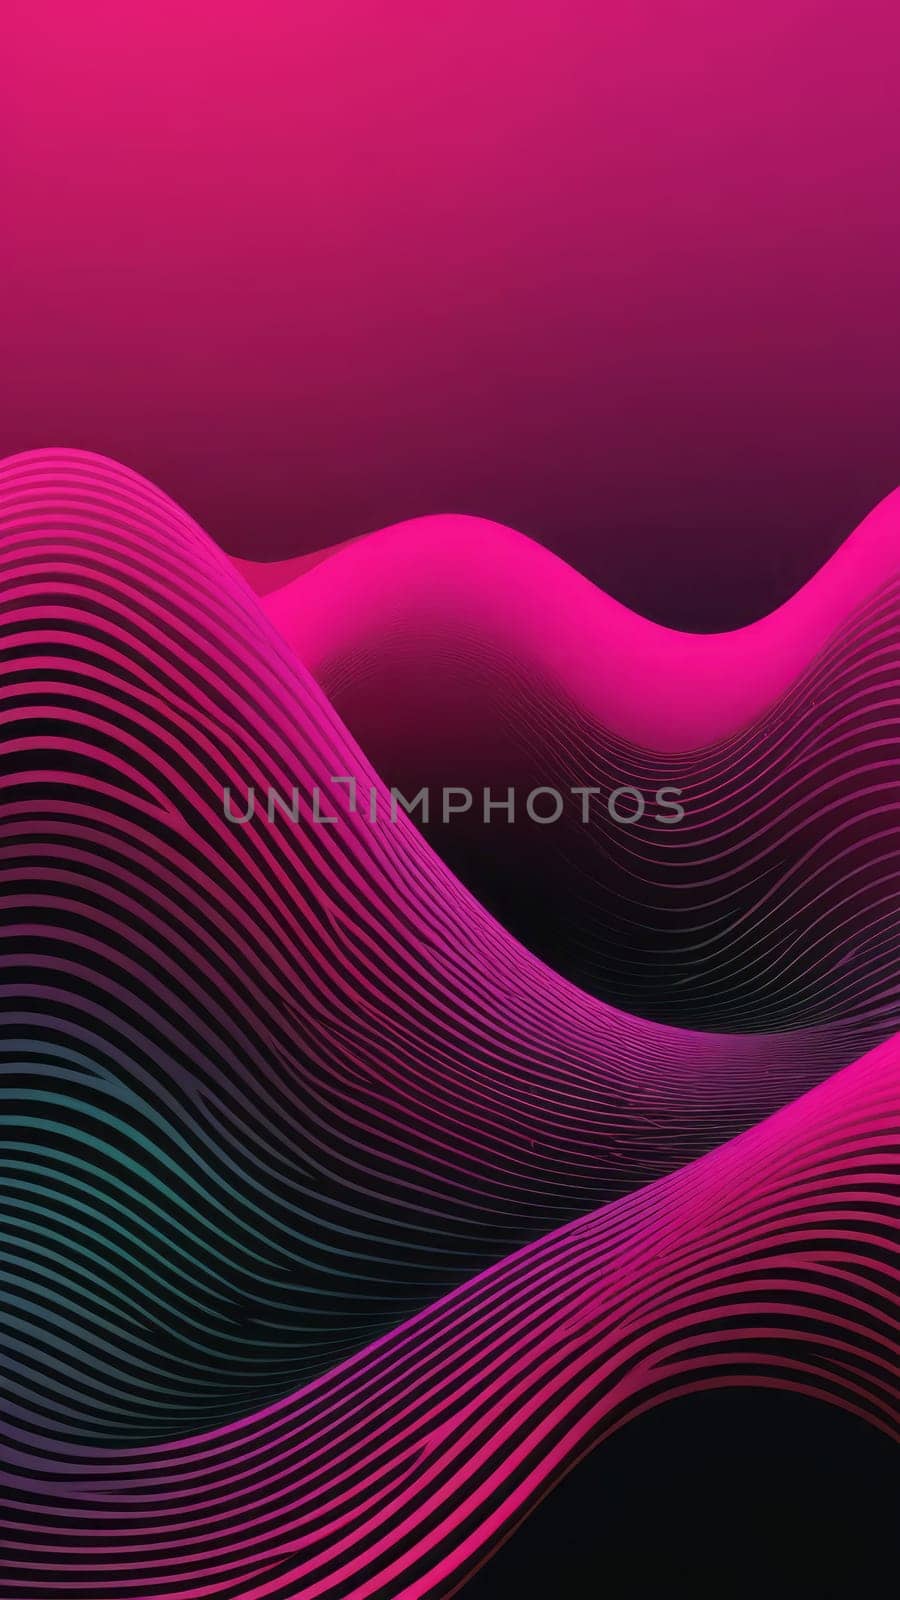 Art for inspiration from Waveform shapes and black by nkotlyar